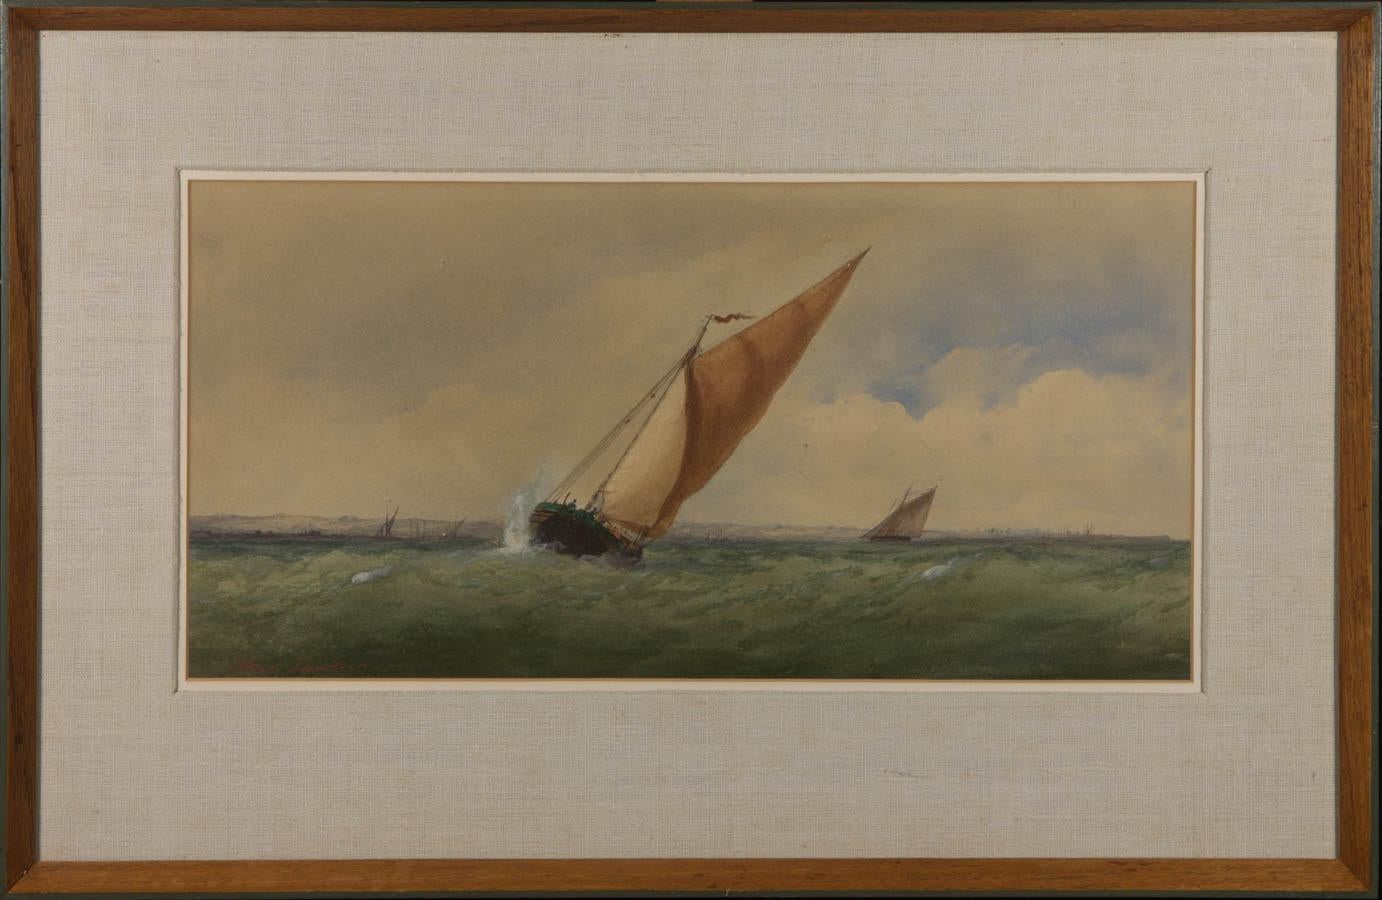 A very fine Victorian coastal scene by the British artist Charles Taylor Jnr, depicting a large sailing boat wrestling with the choppy seawater. Very well presented in a canvas double card mount and simple wood frame. Signed. On watercolour paper.